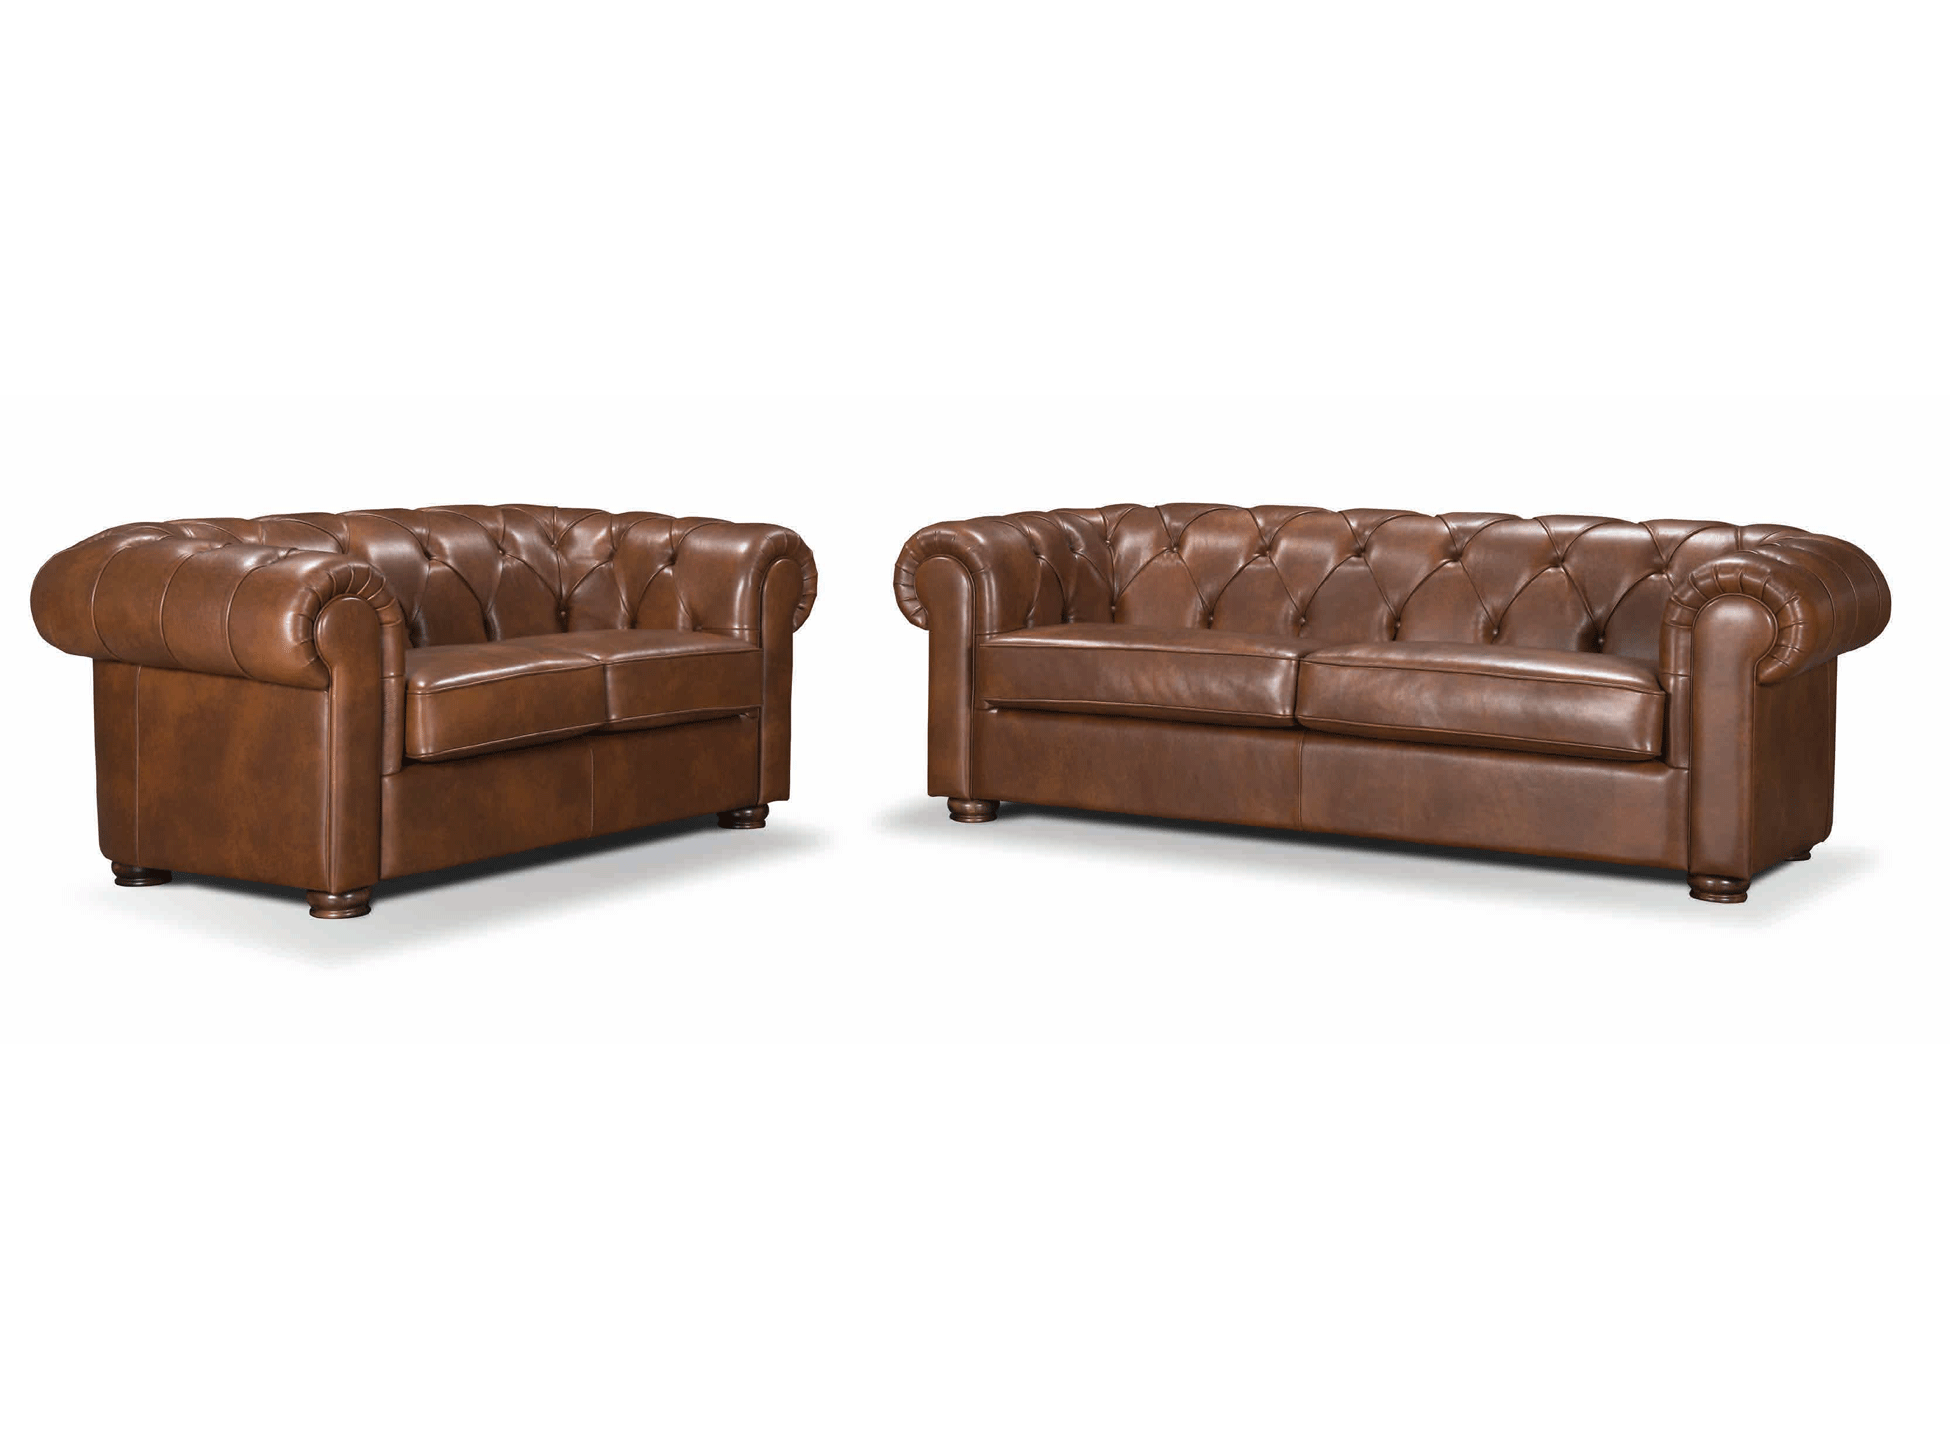 Living Room Furniture Reclining and Sliding Seats Sets Perugia Living room